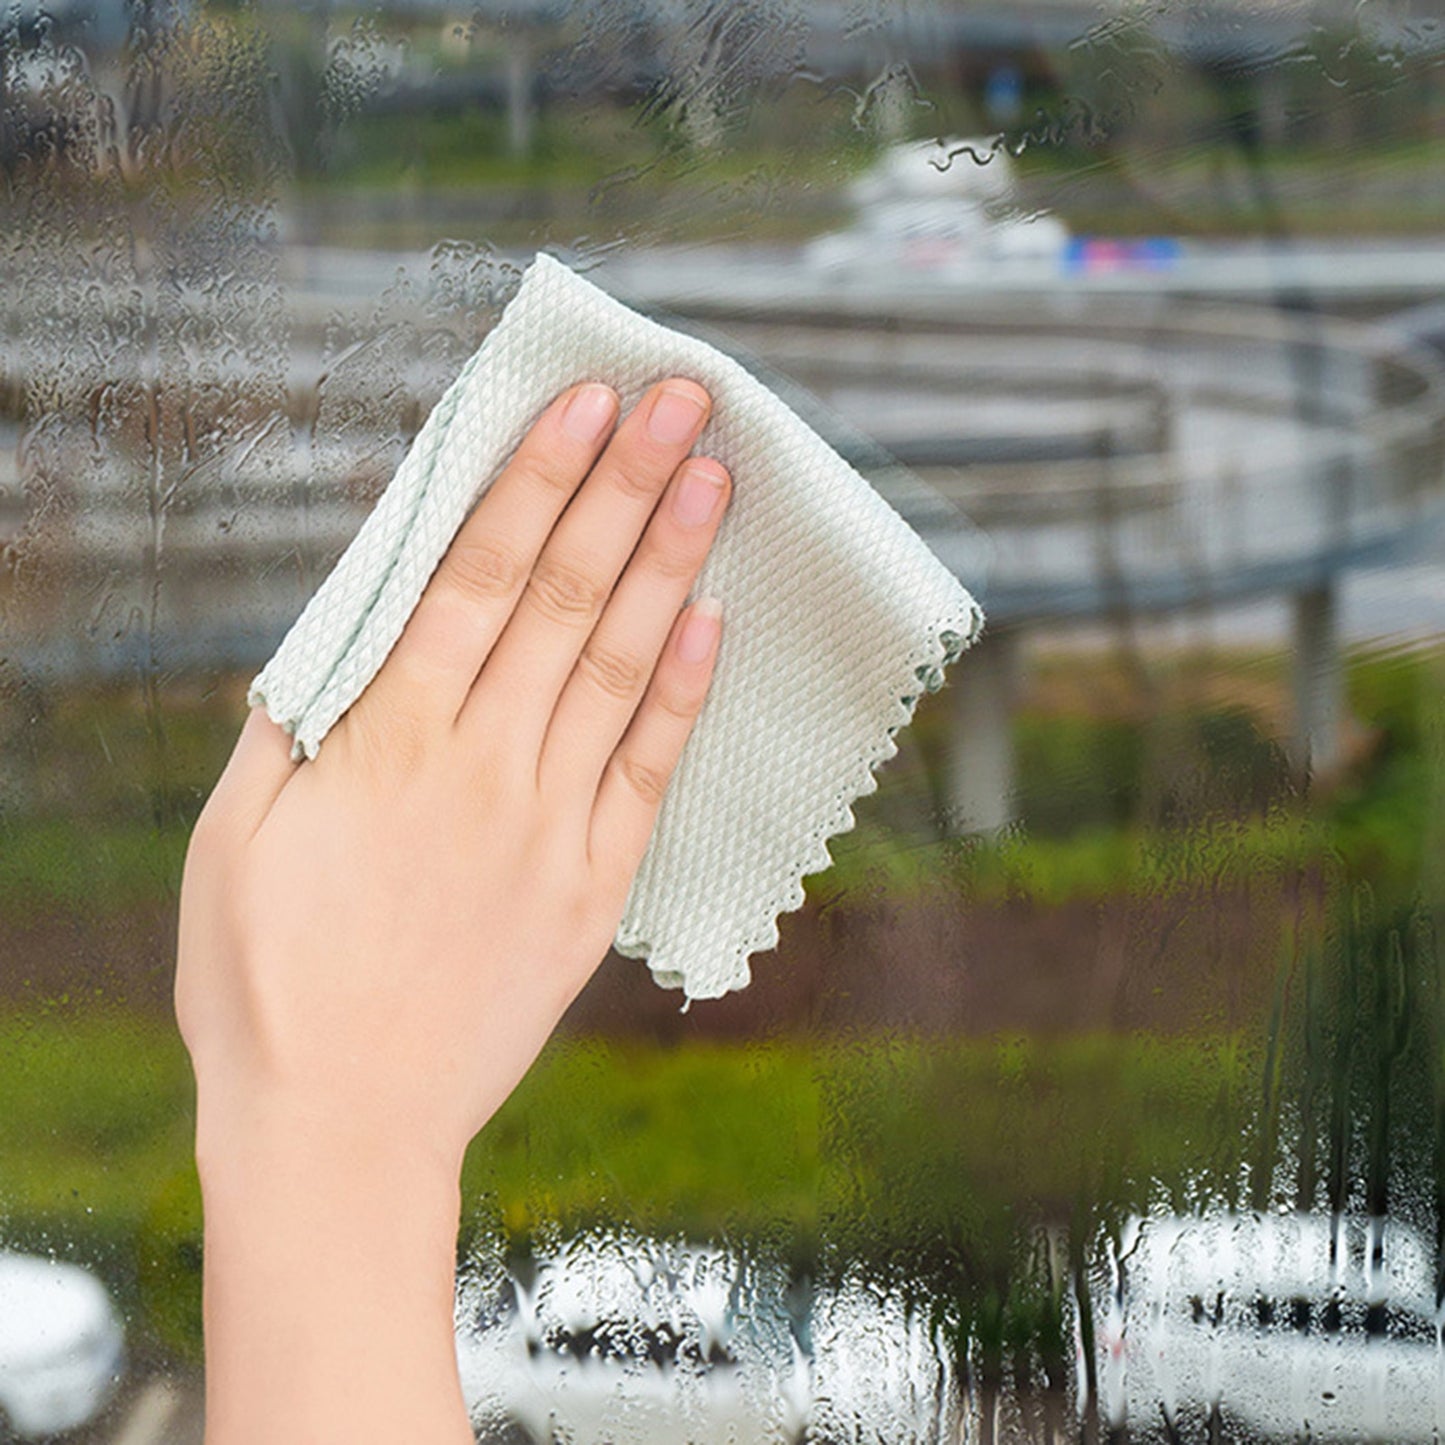 A person wiping a window with a Fish Scale Nano Reusable Cleaning Cloth from MezoJaoie Wonder Lifestyle Store.